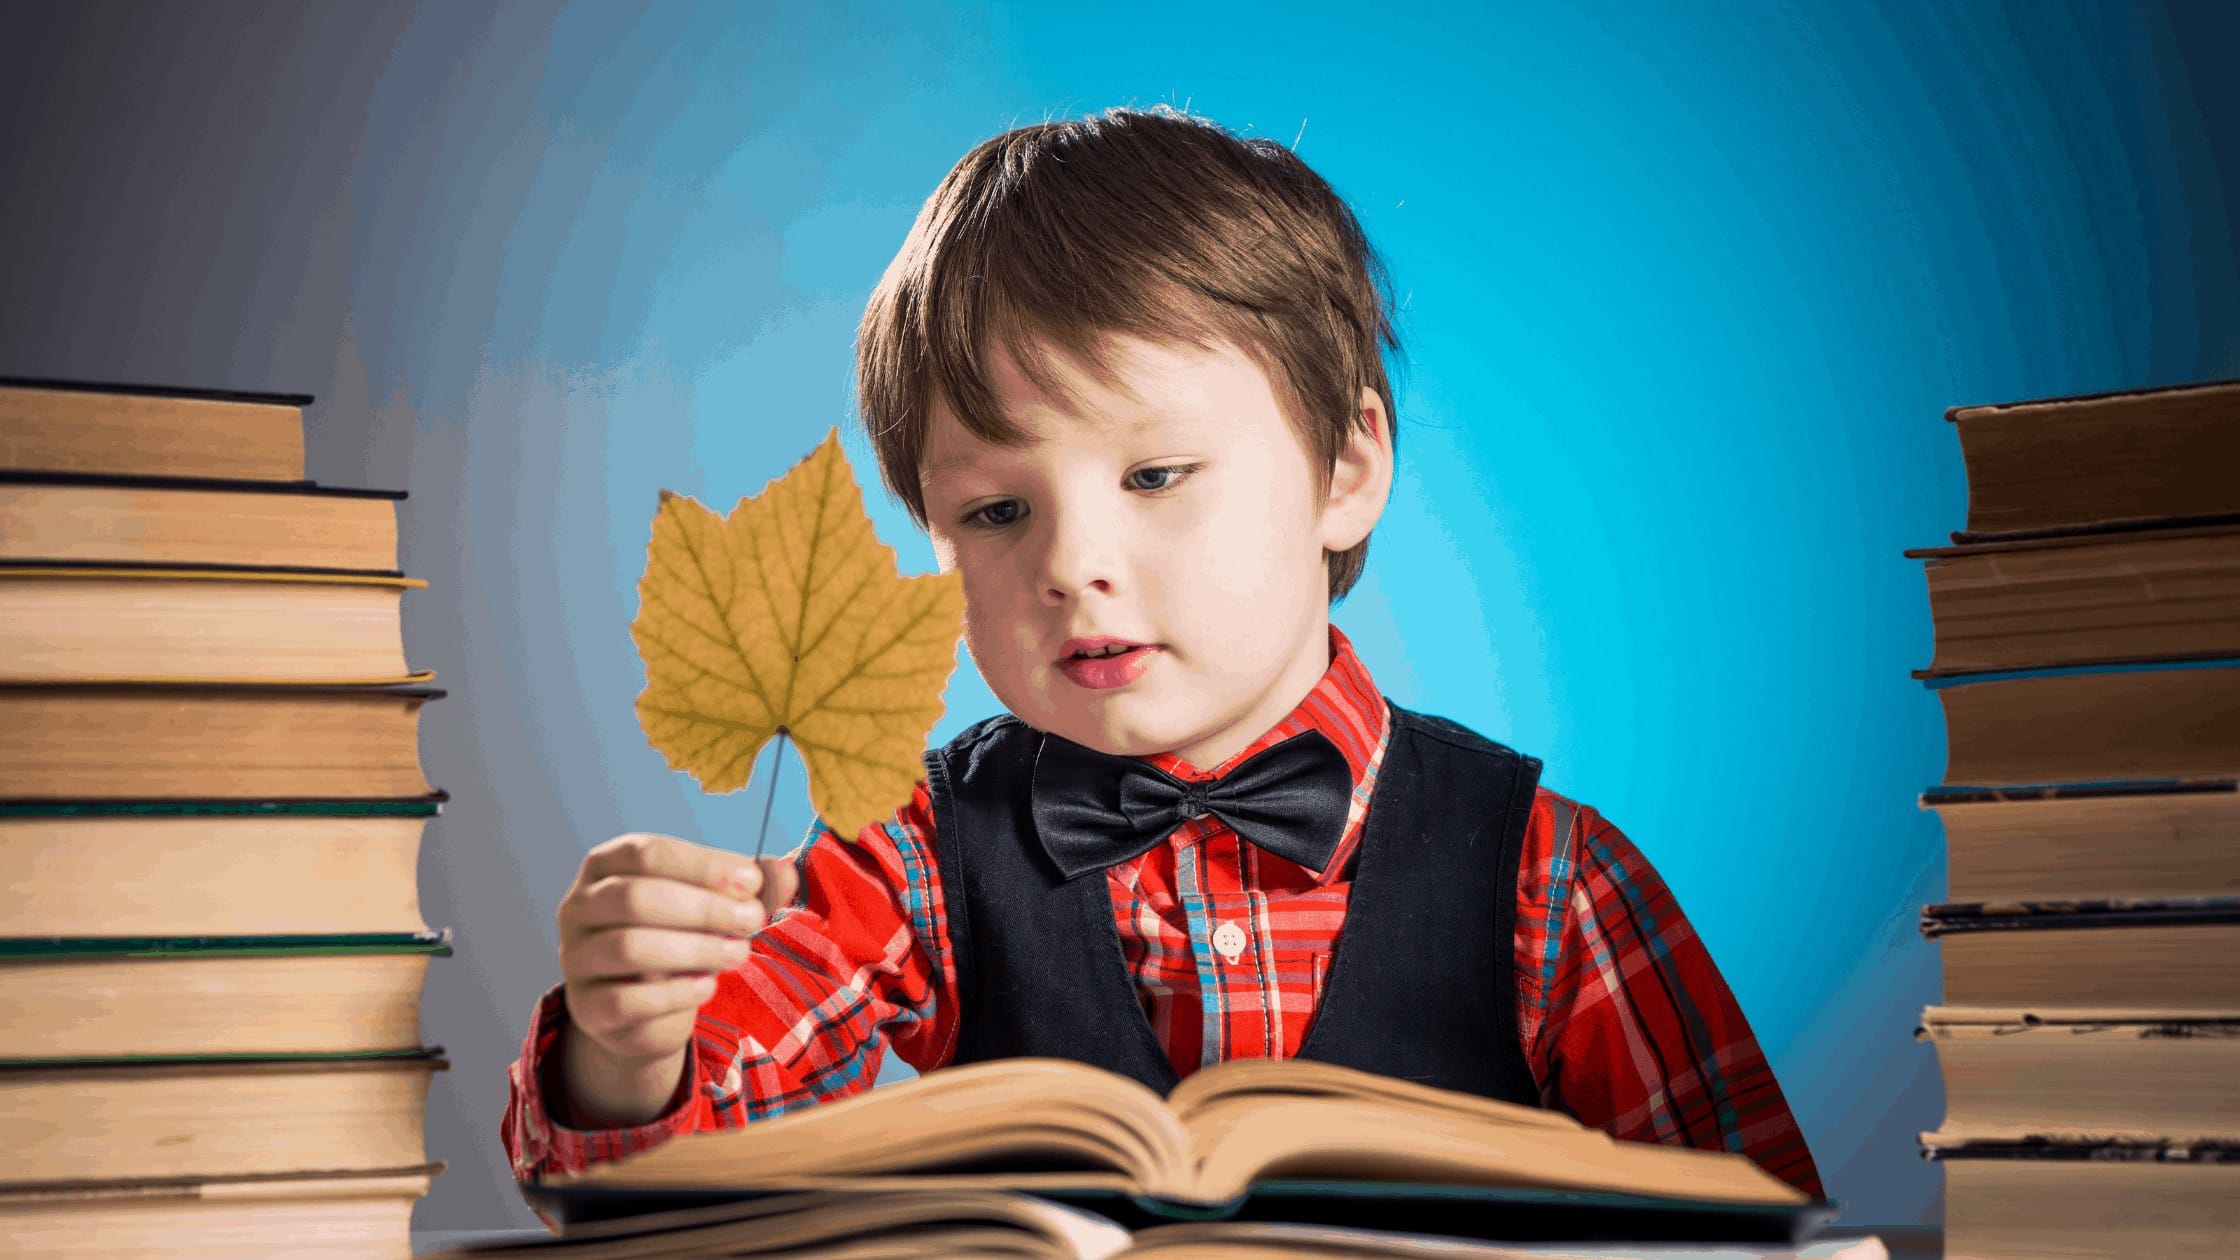 Child with leaf and books